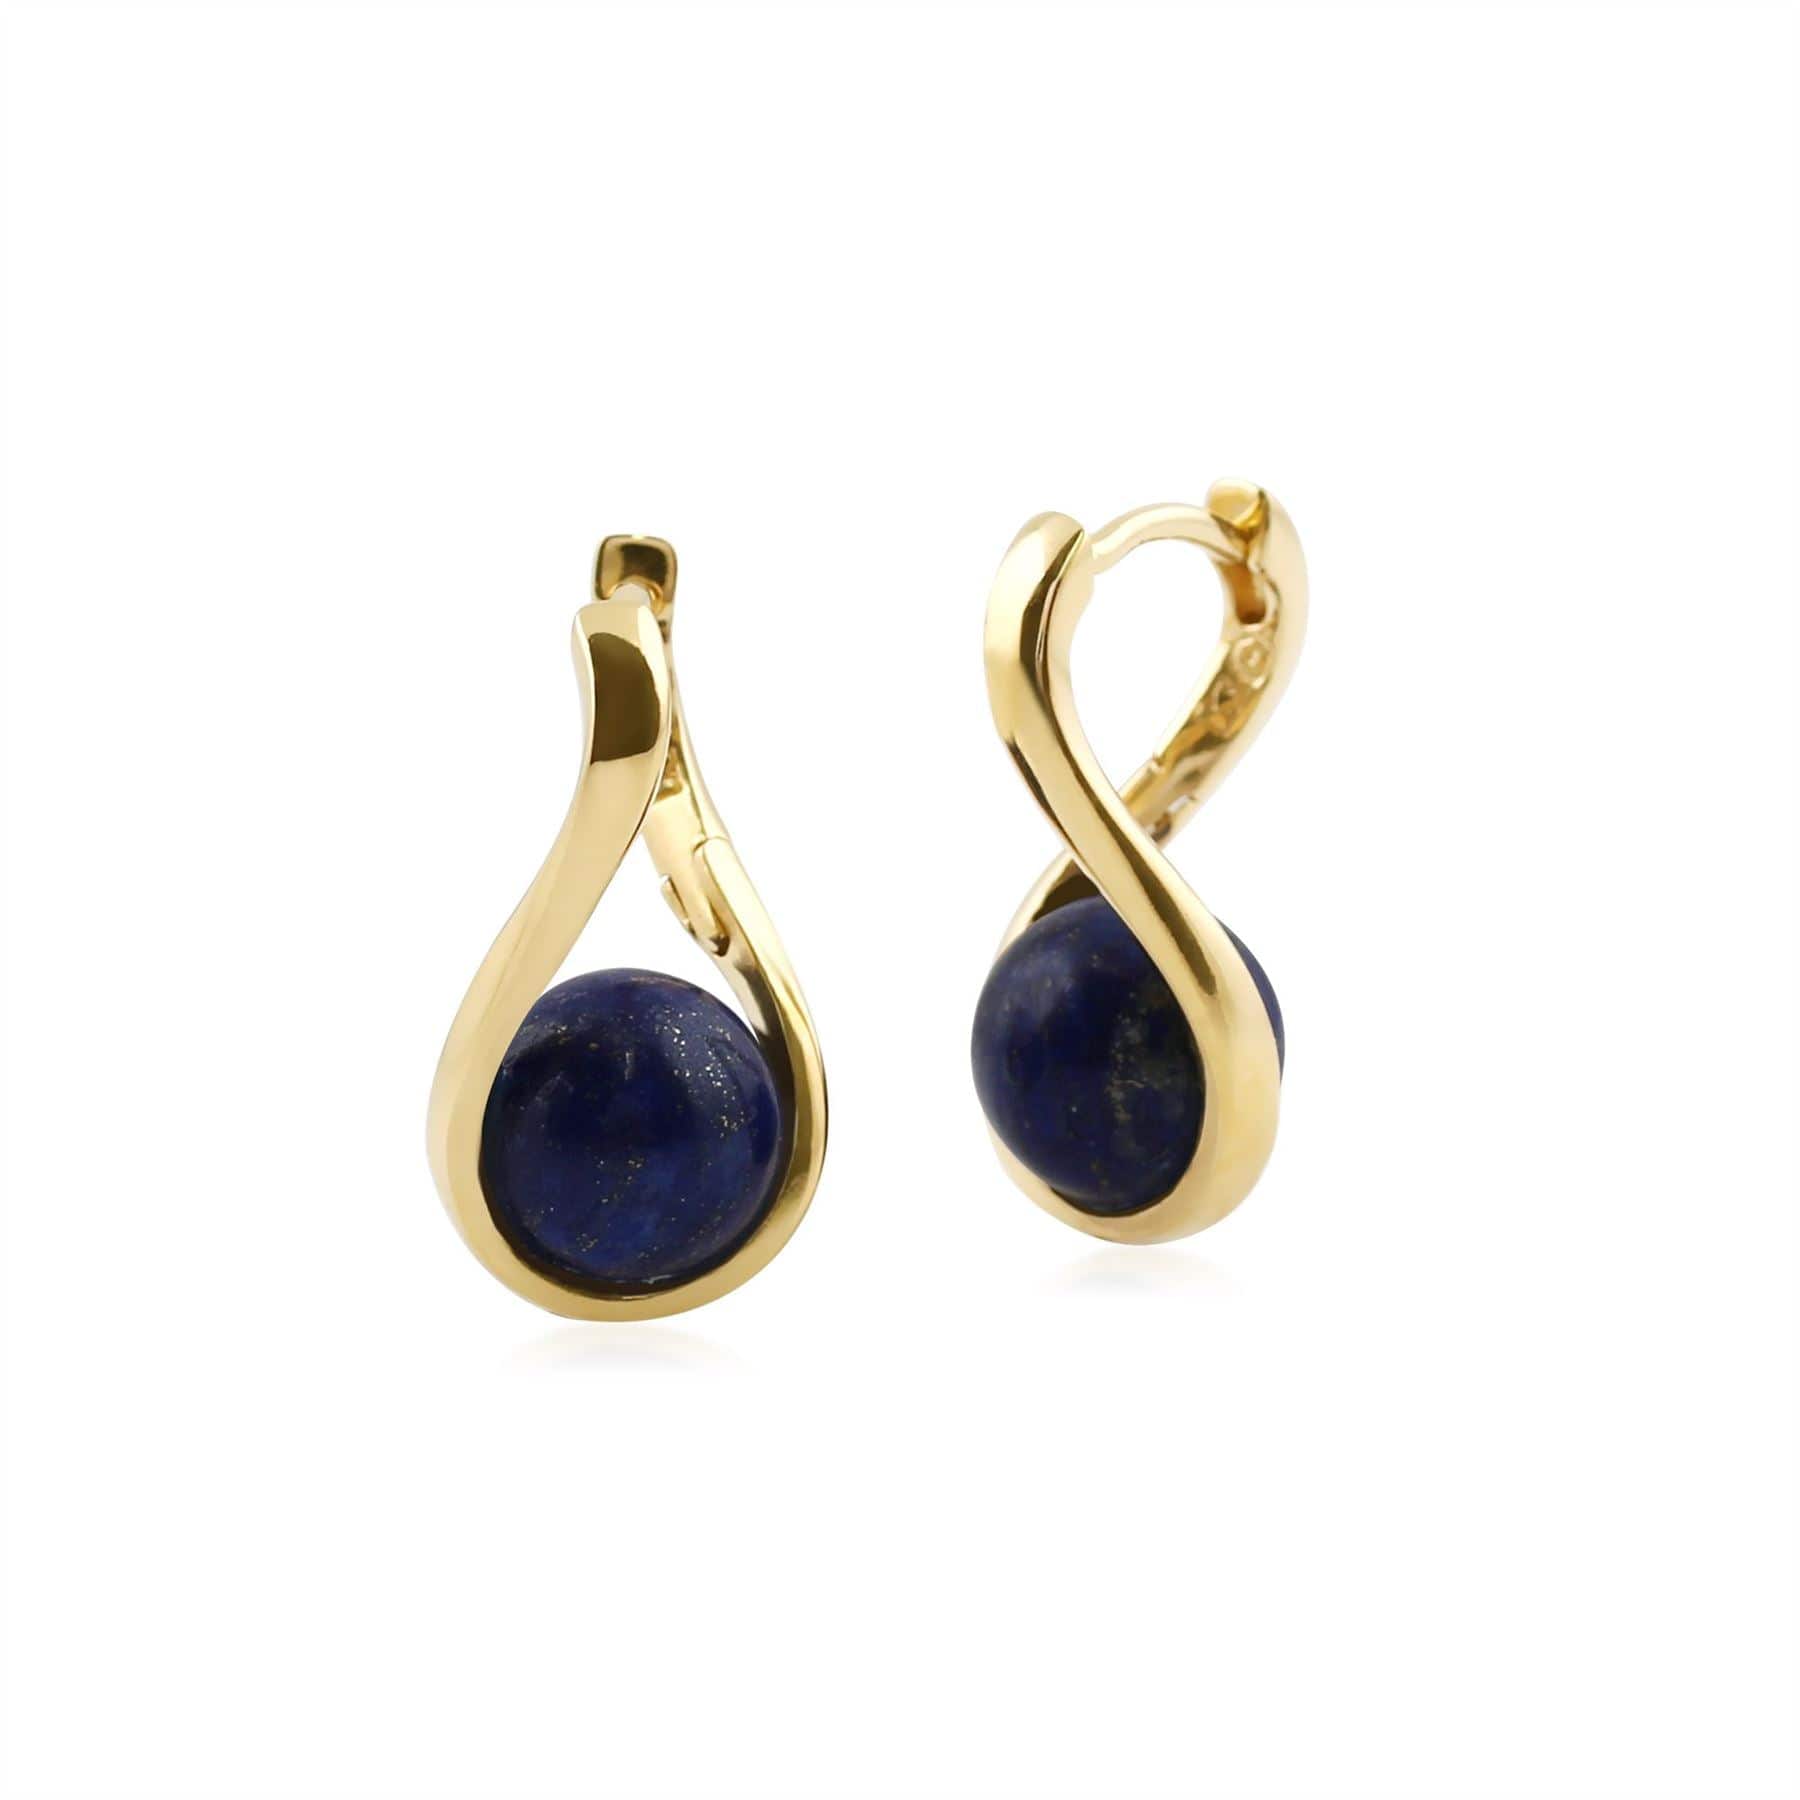 T0954E90E4 Kosmos Lapis Lazuli Orb Earrings in Yellow Gold Plated Sterling Silver 1